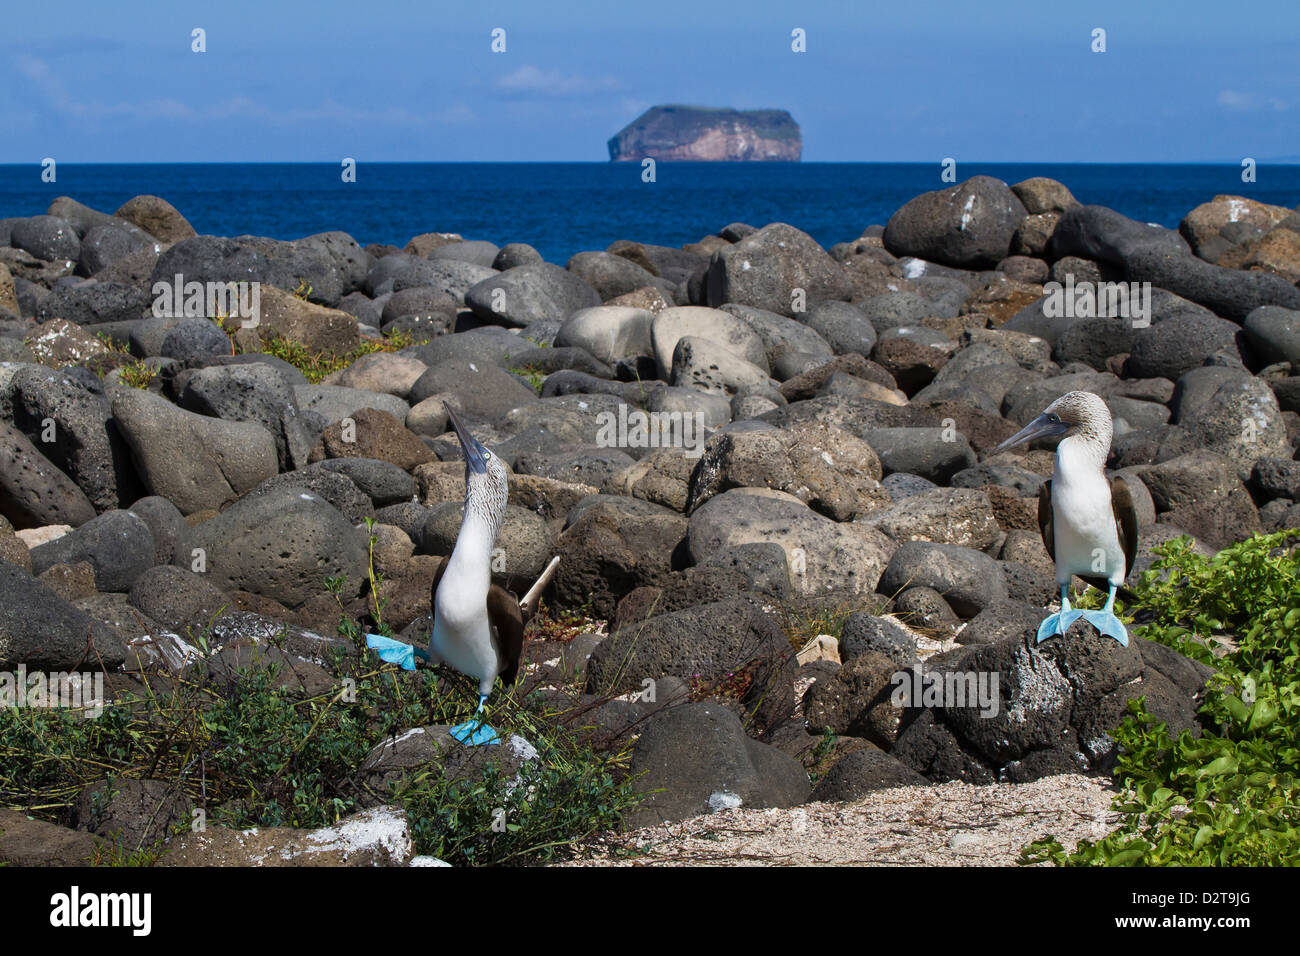 Blue-footed booby (Sula nebouxii) pair, North Seymour Island, Galapagos Islands, Ecuador Stock Photo